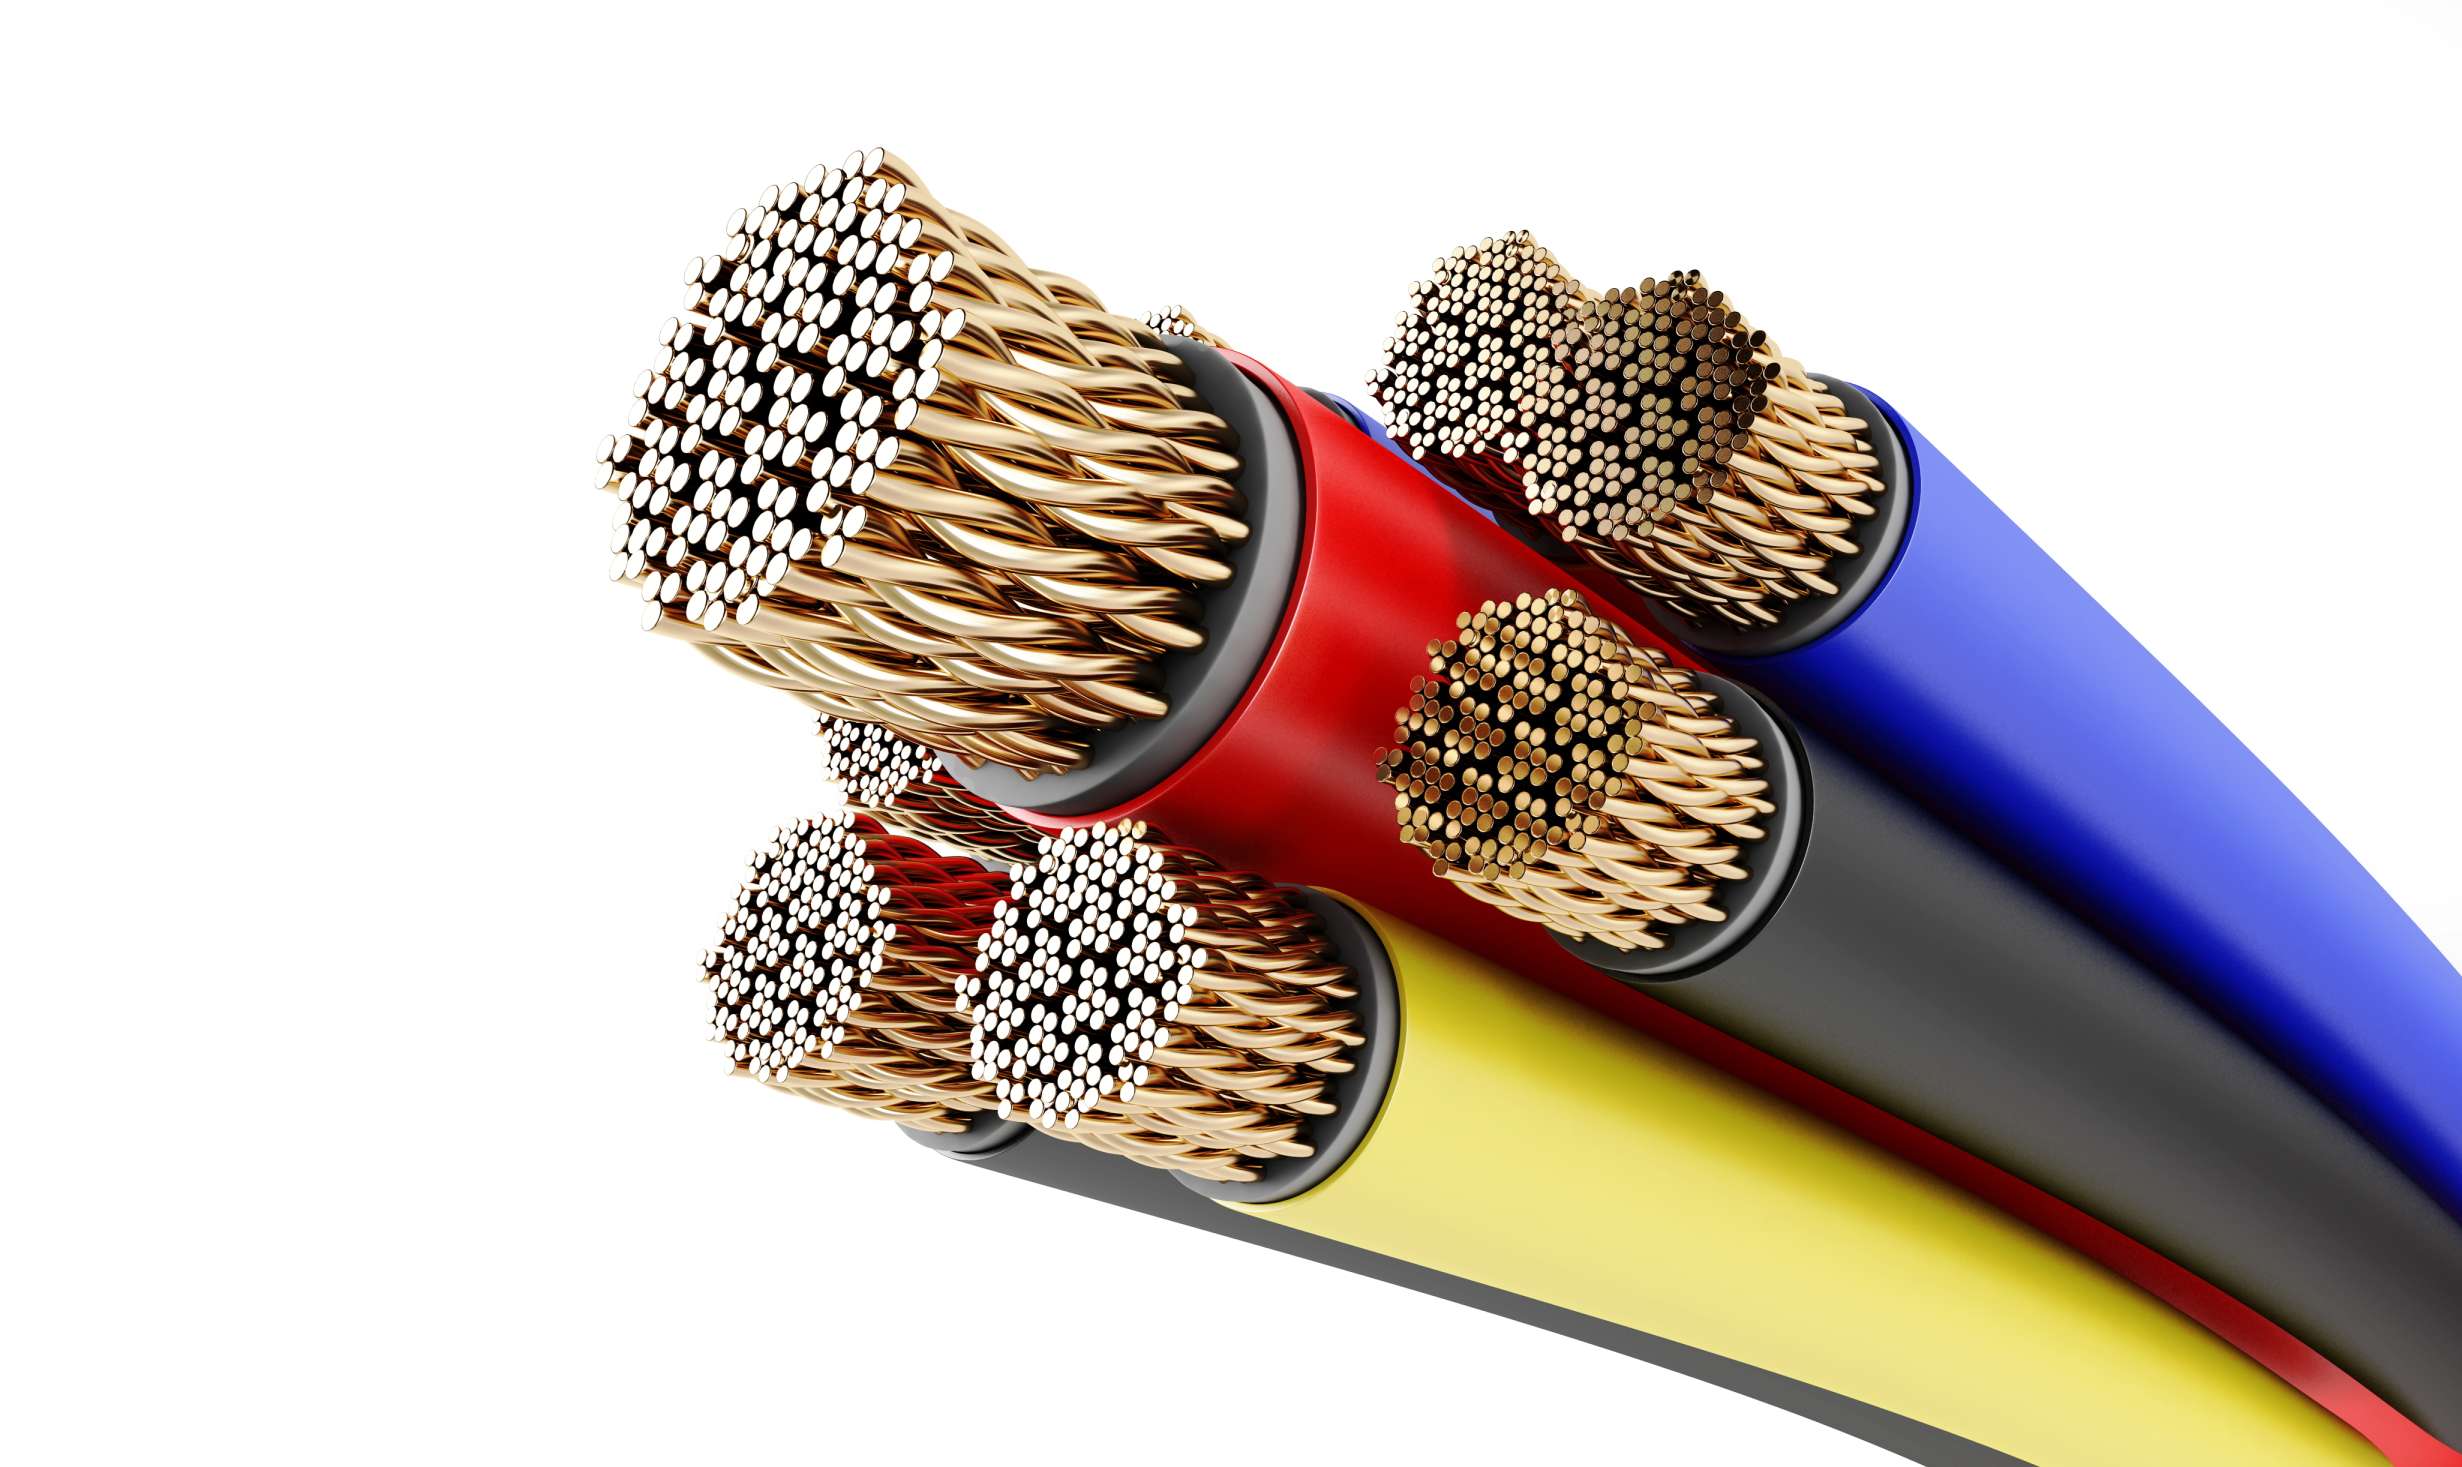 How to Find an Electrical Equipment Supplier on Electric Cable